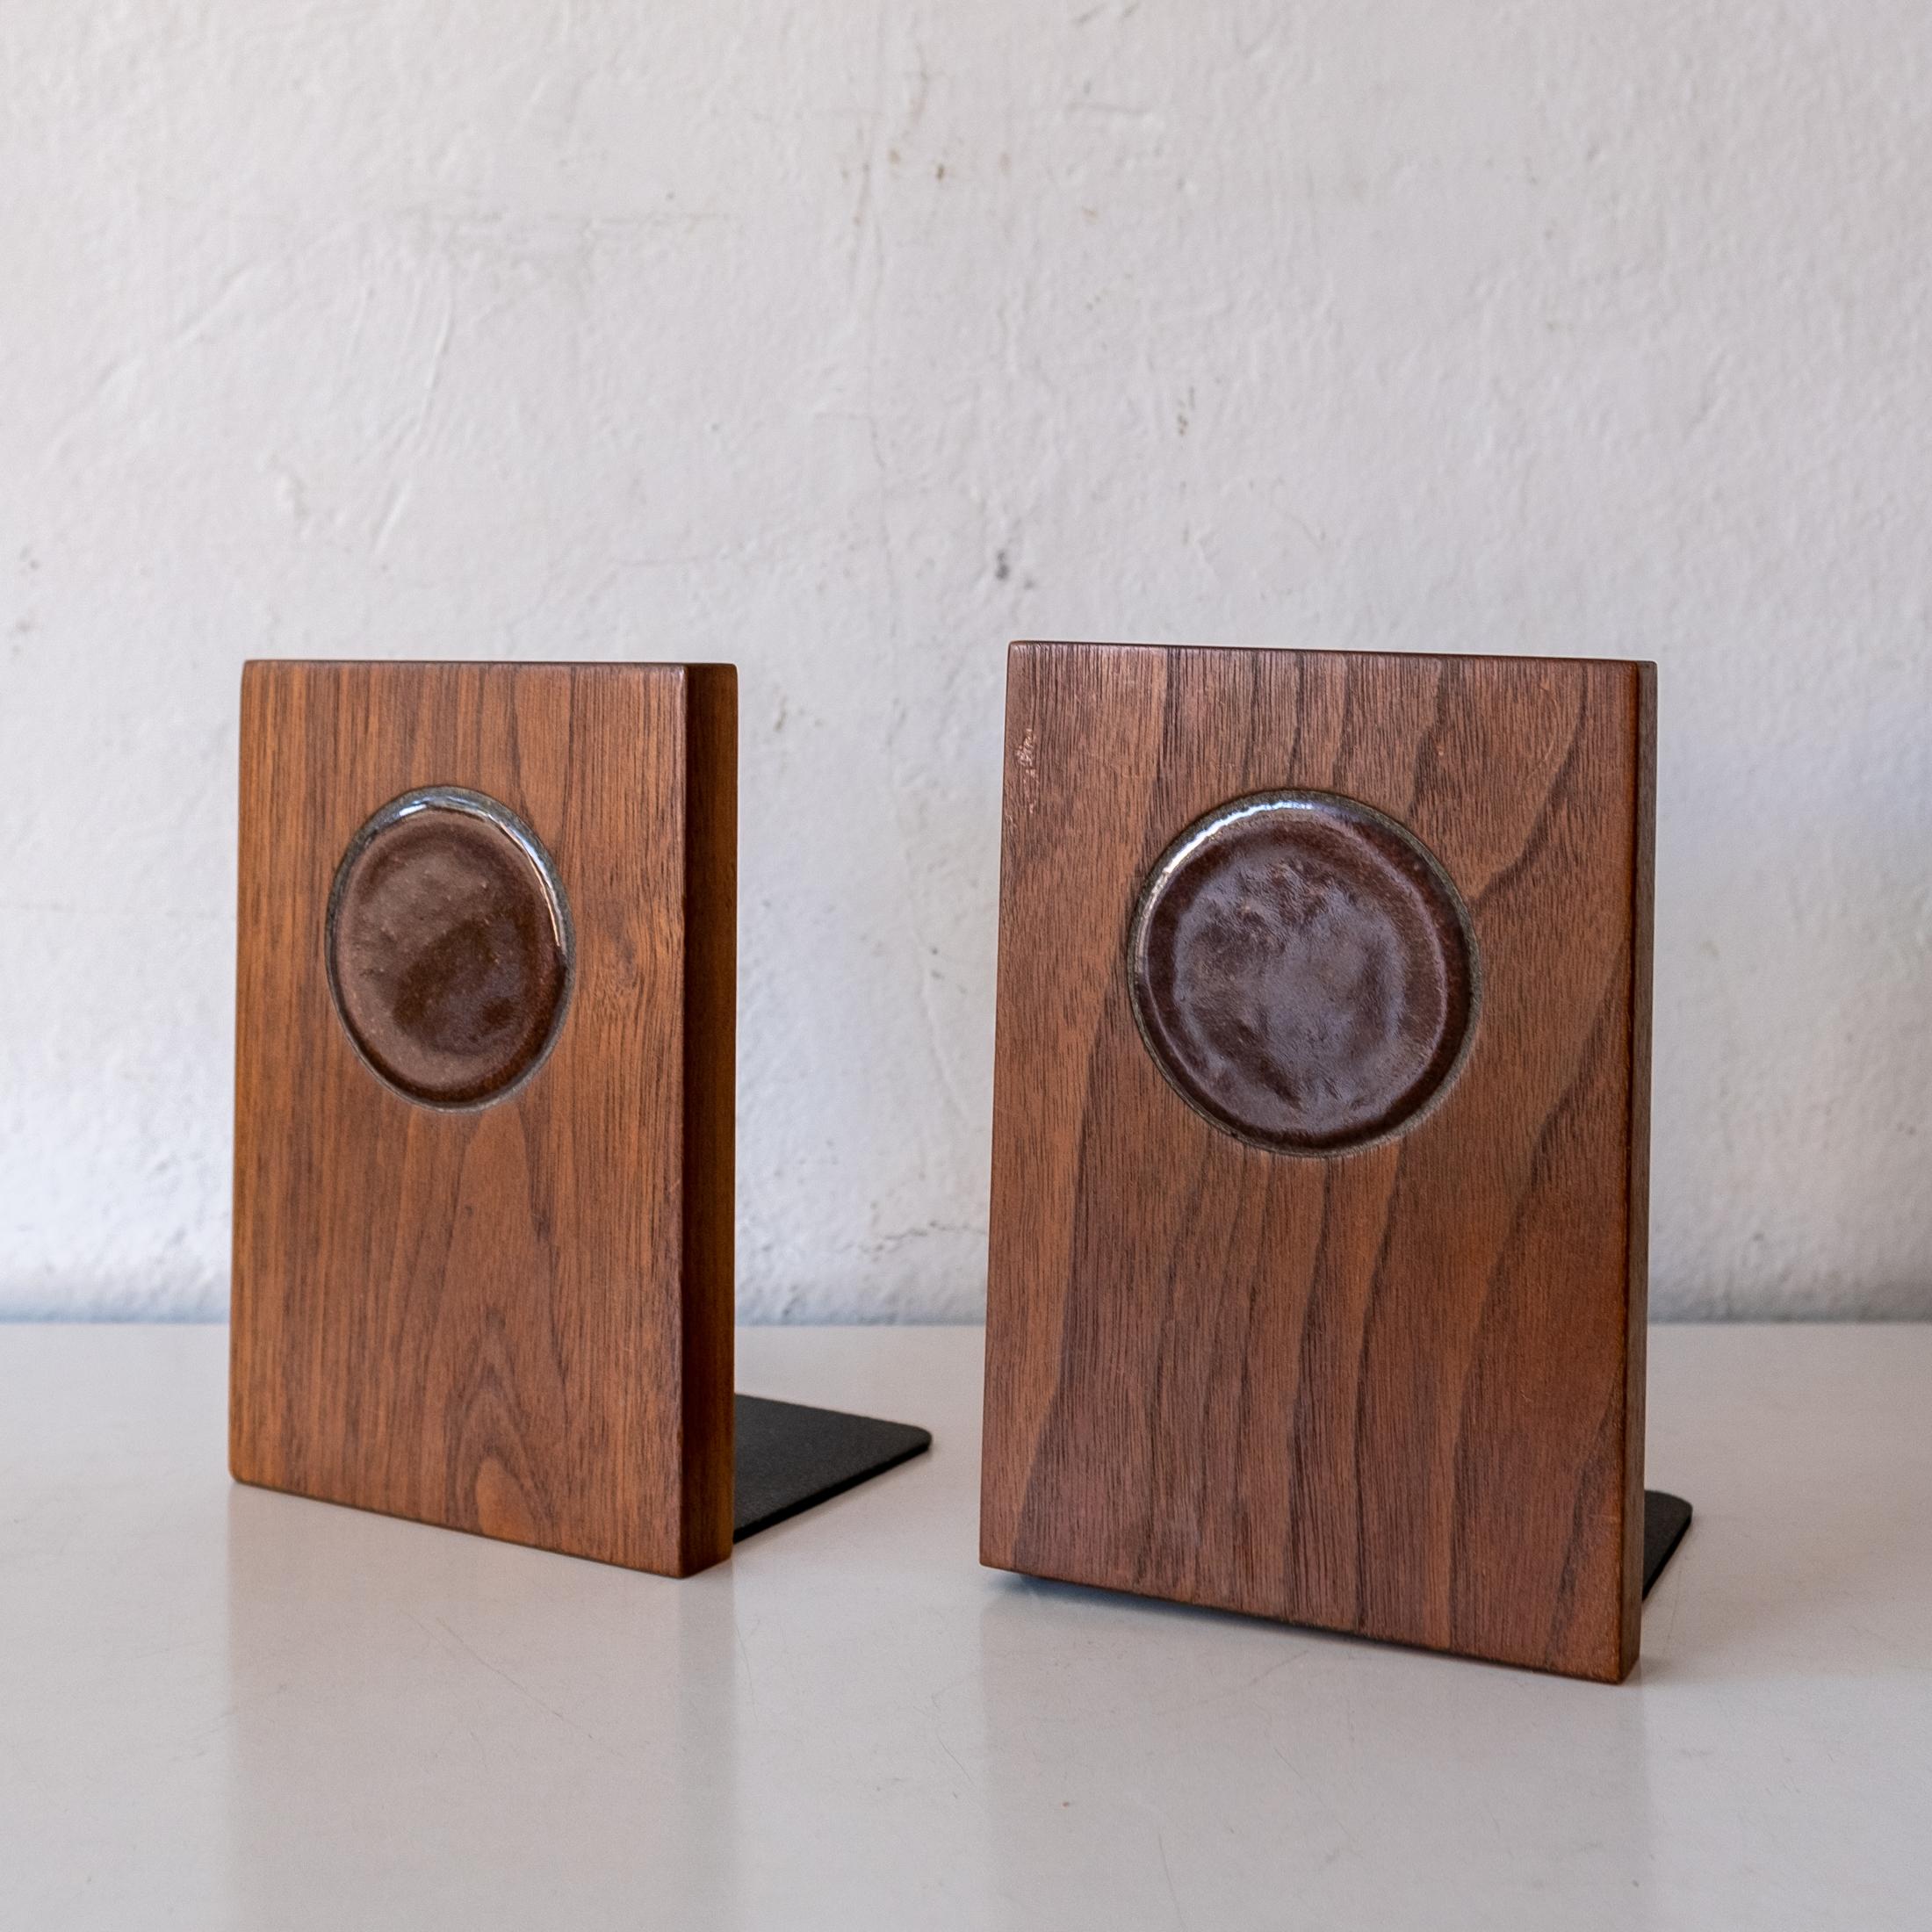 20th Century Midcentury Walnut and Ceramic Tile and Bookends